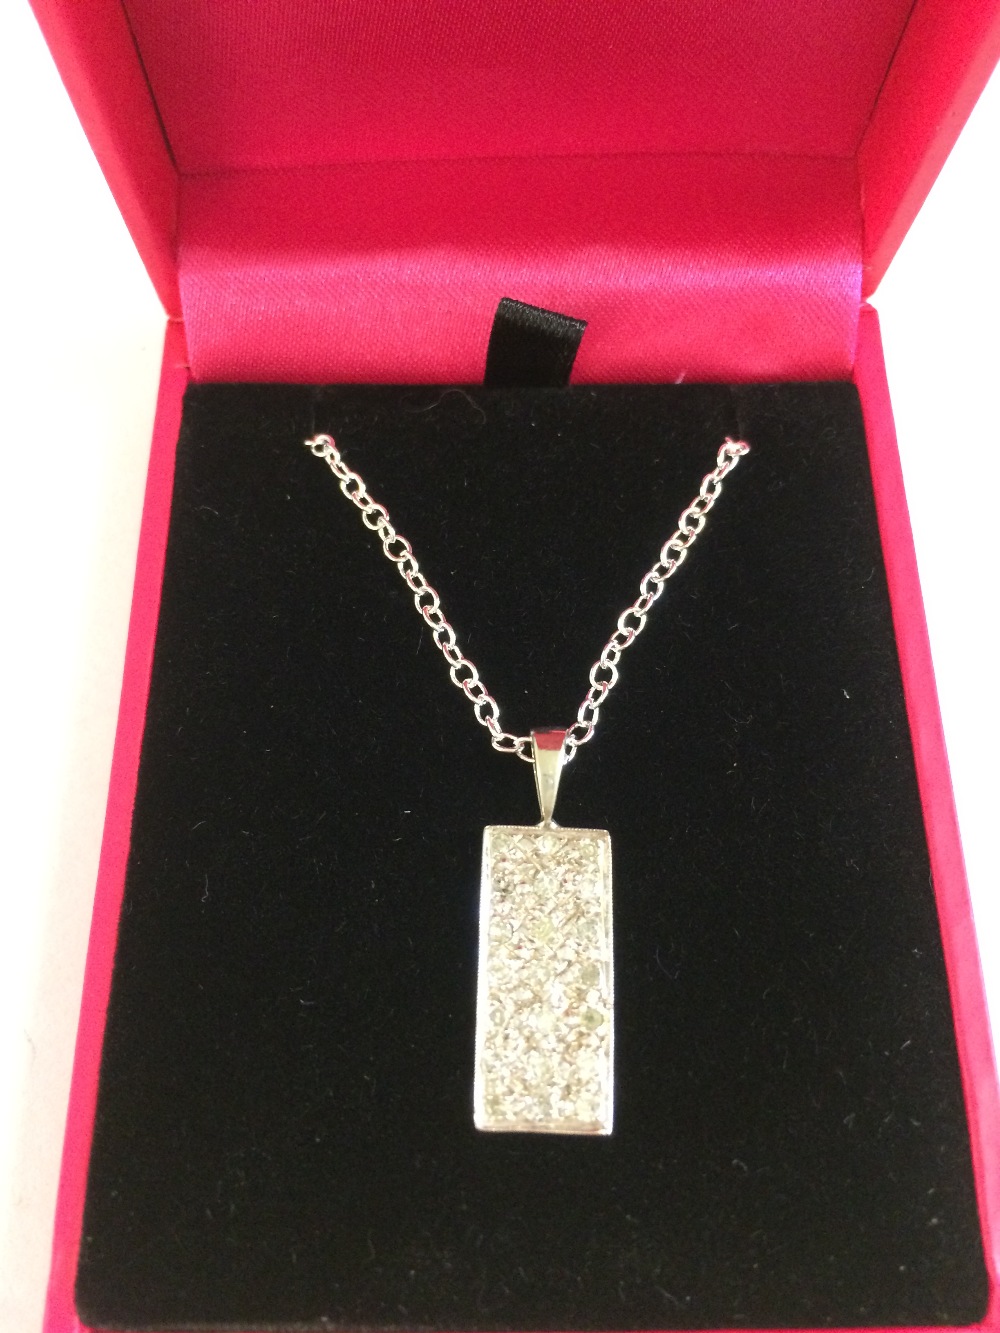 White gold and diamond pendant necklace